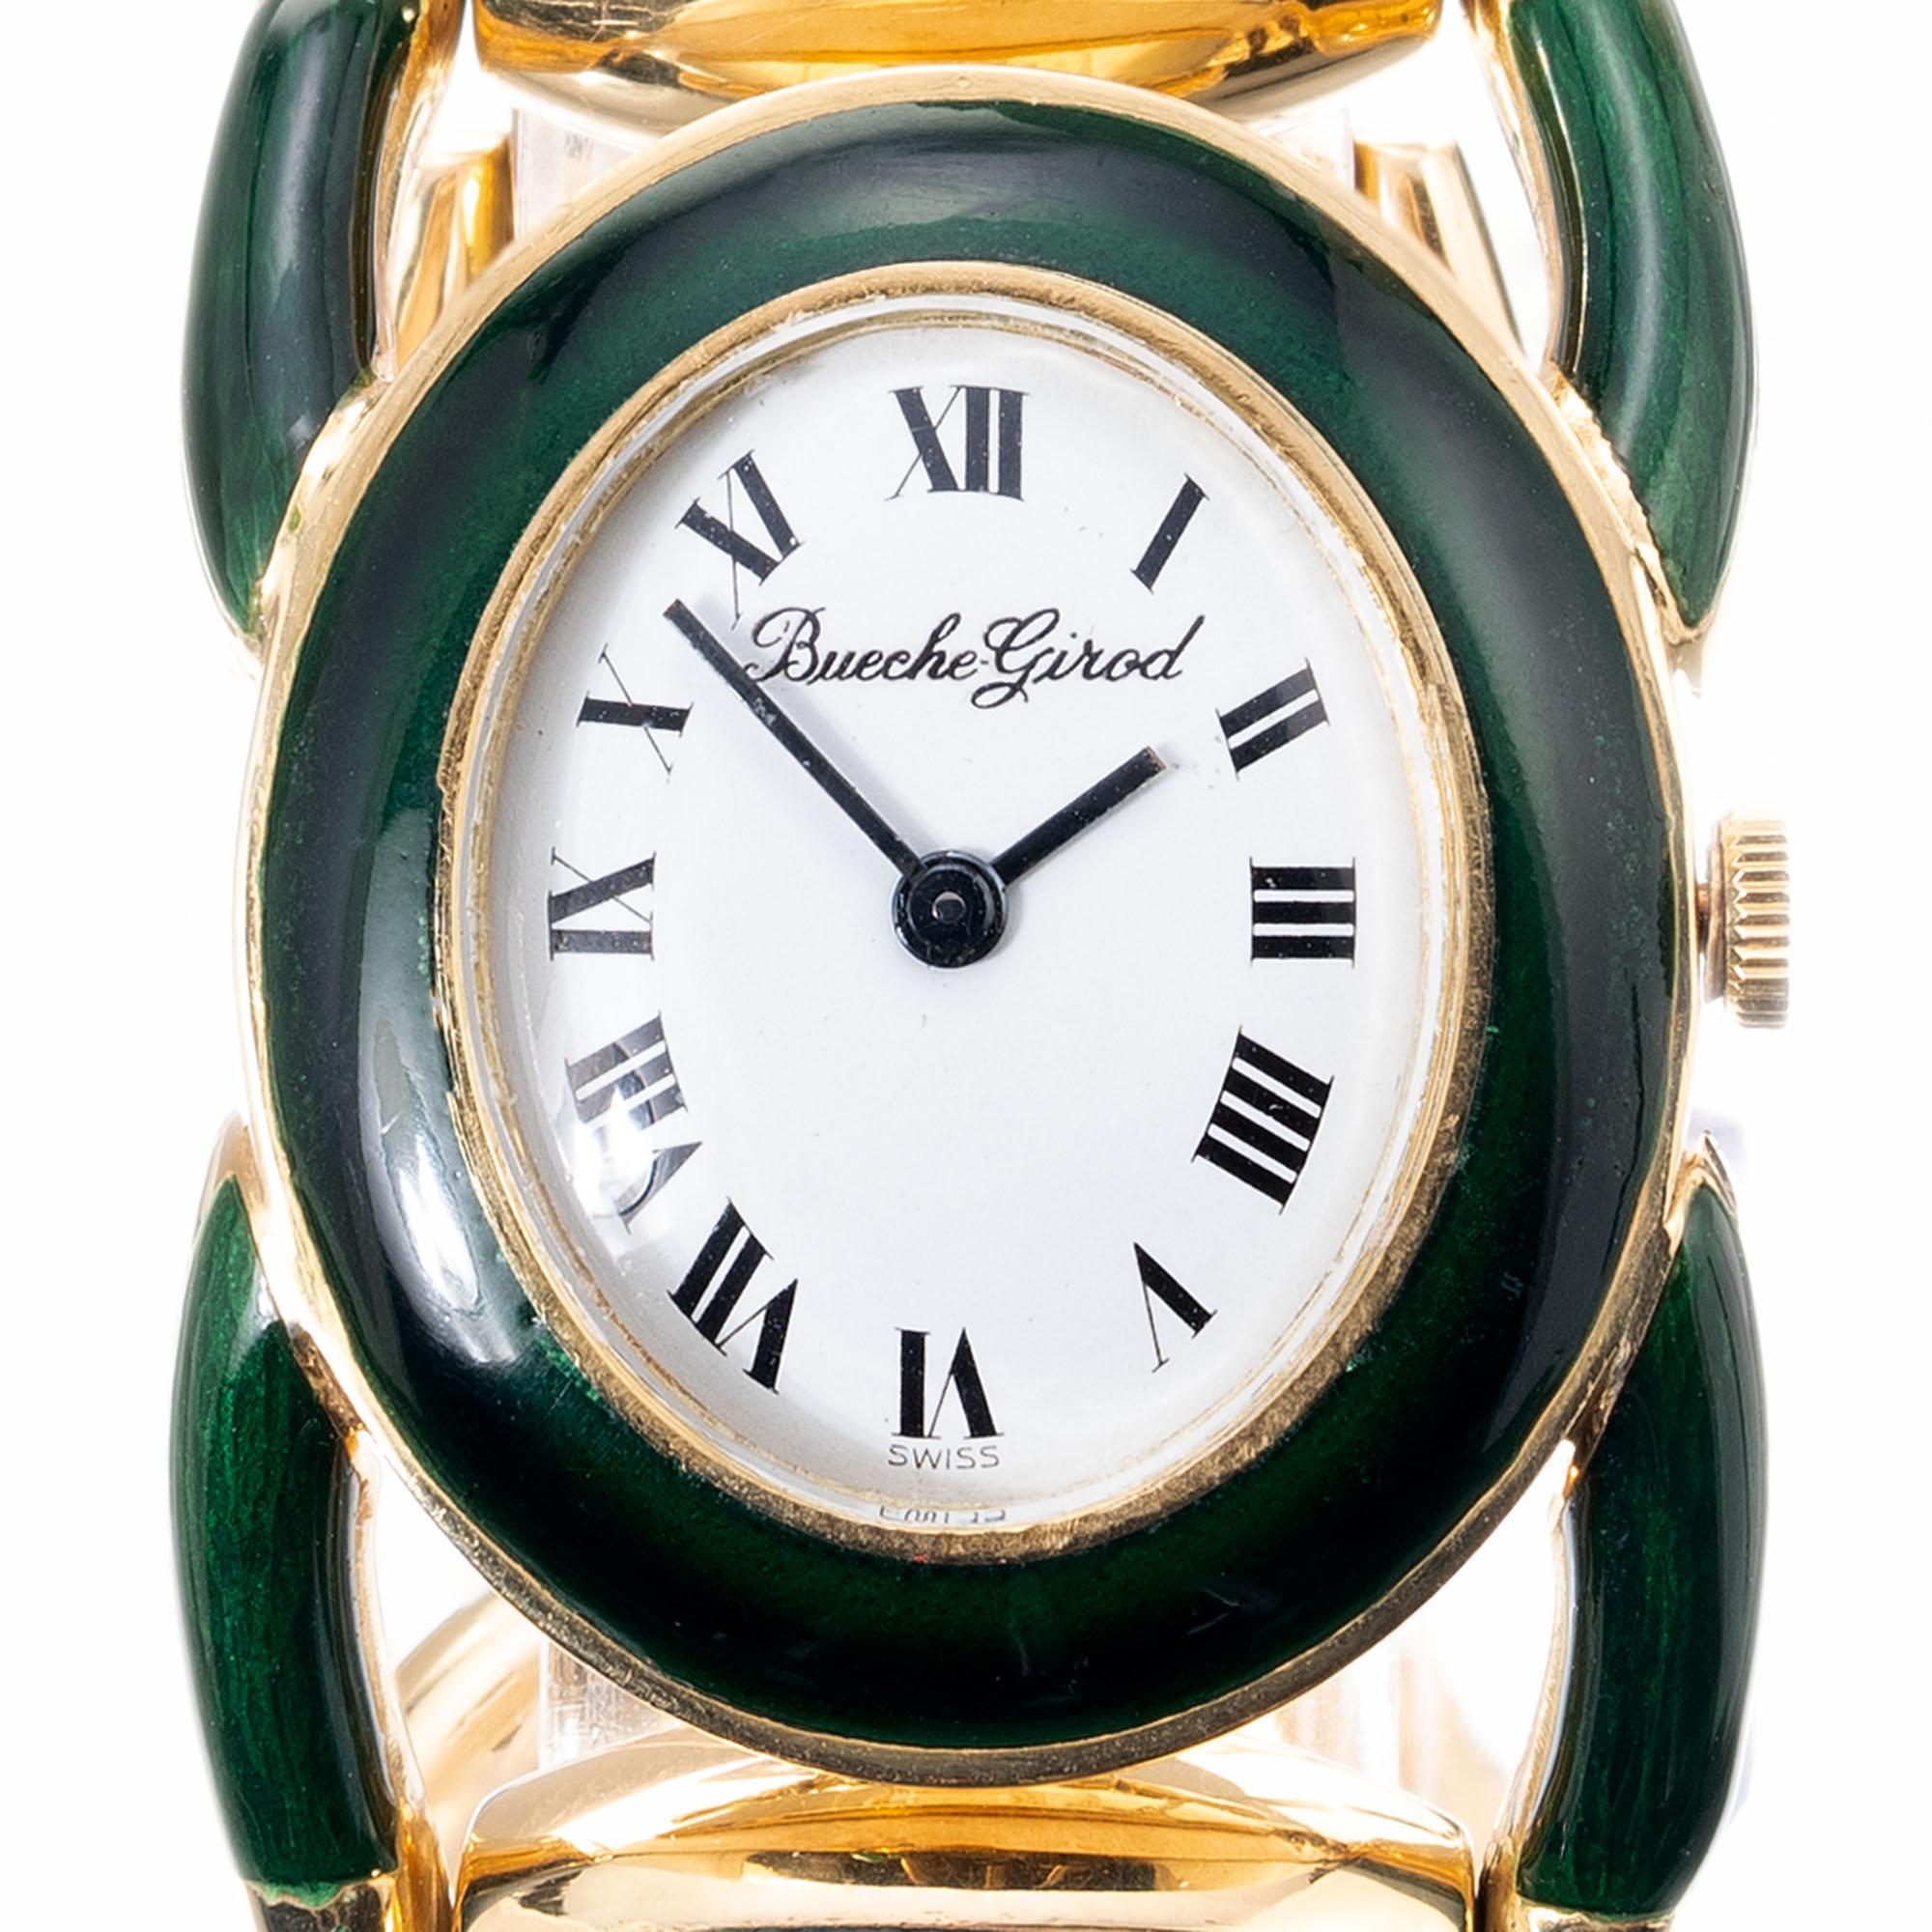 Vintage 1960's Equestrian theme 18k yellow gold green enamel wristwatch. 17 jewel manual wind movement. All original. Length 7.5 inches

Length: 42.24m
Width: 28.84mm
Band width at case: 18mm
Case thickness: 6.31mm
Band: 18k Gold
Crystal: